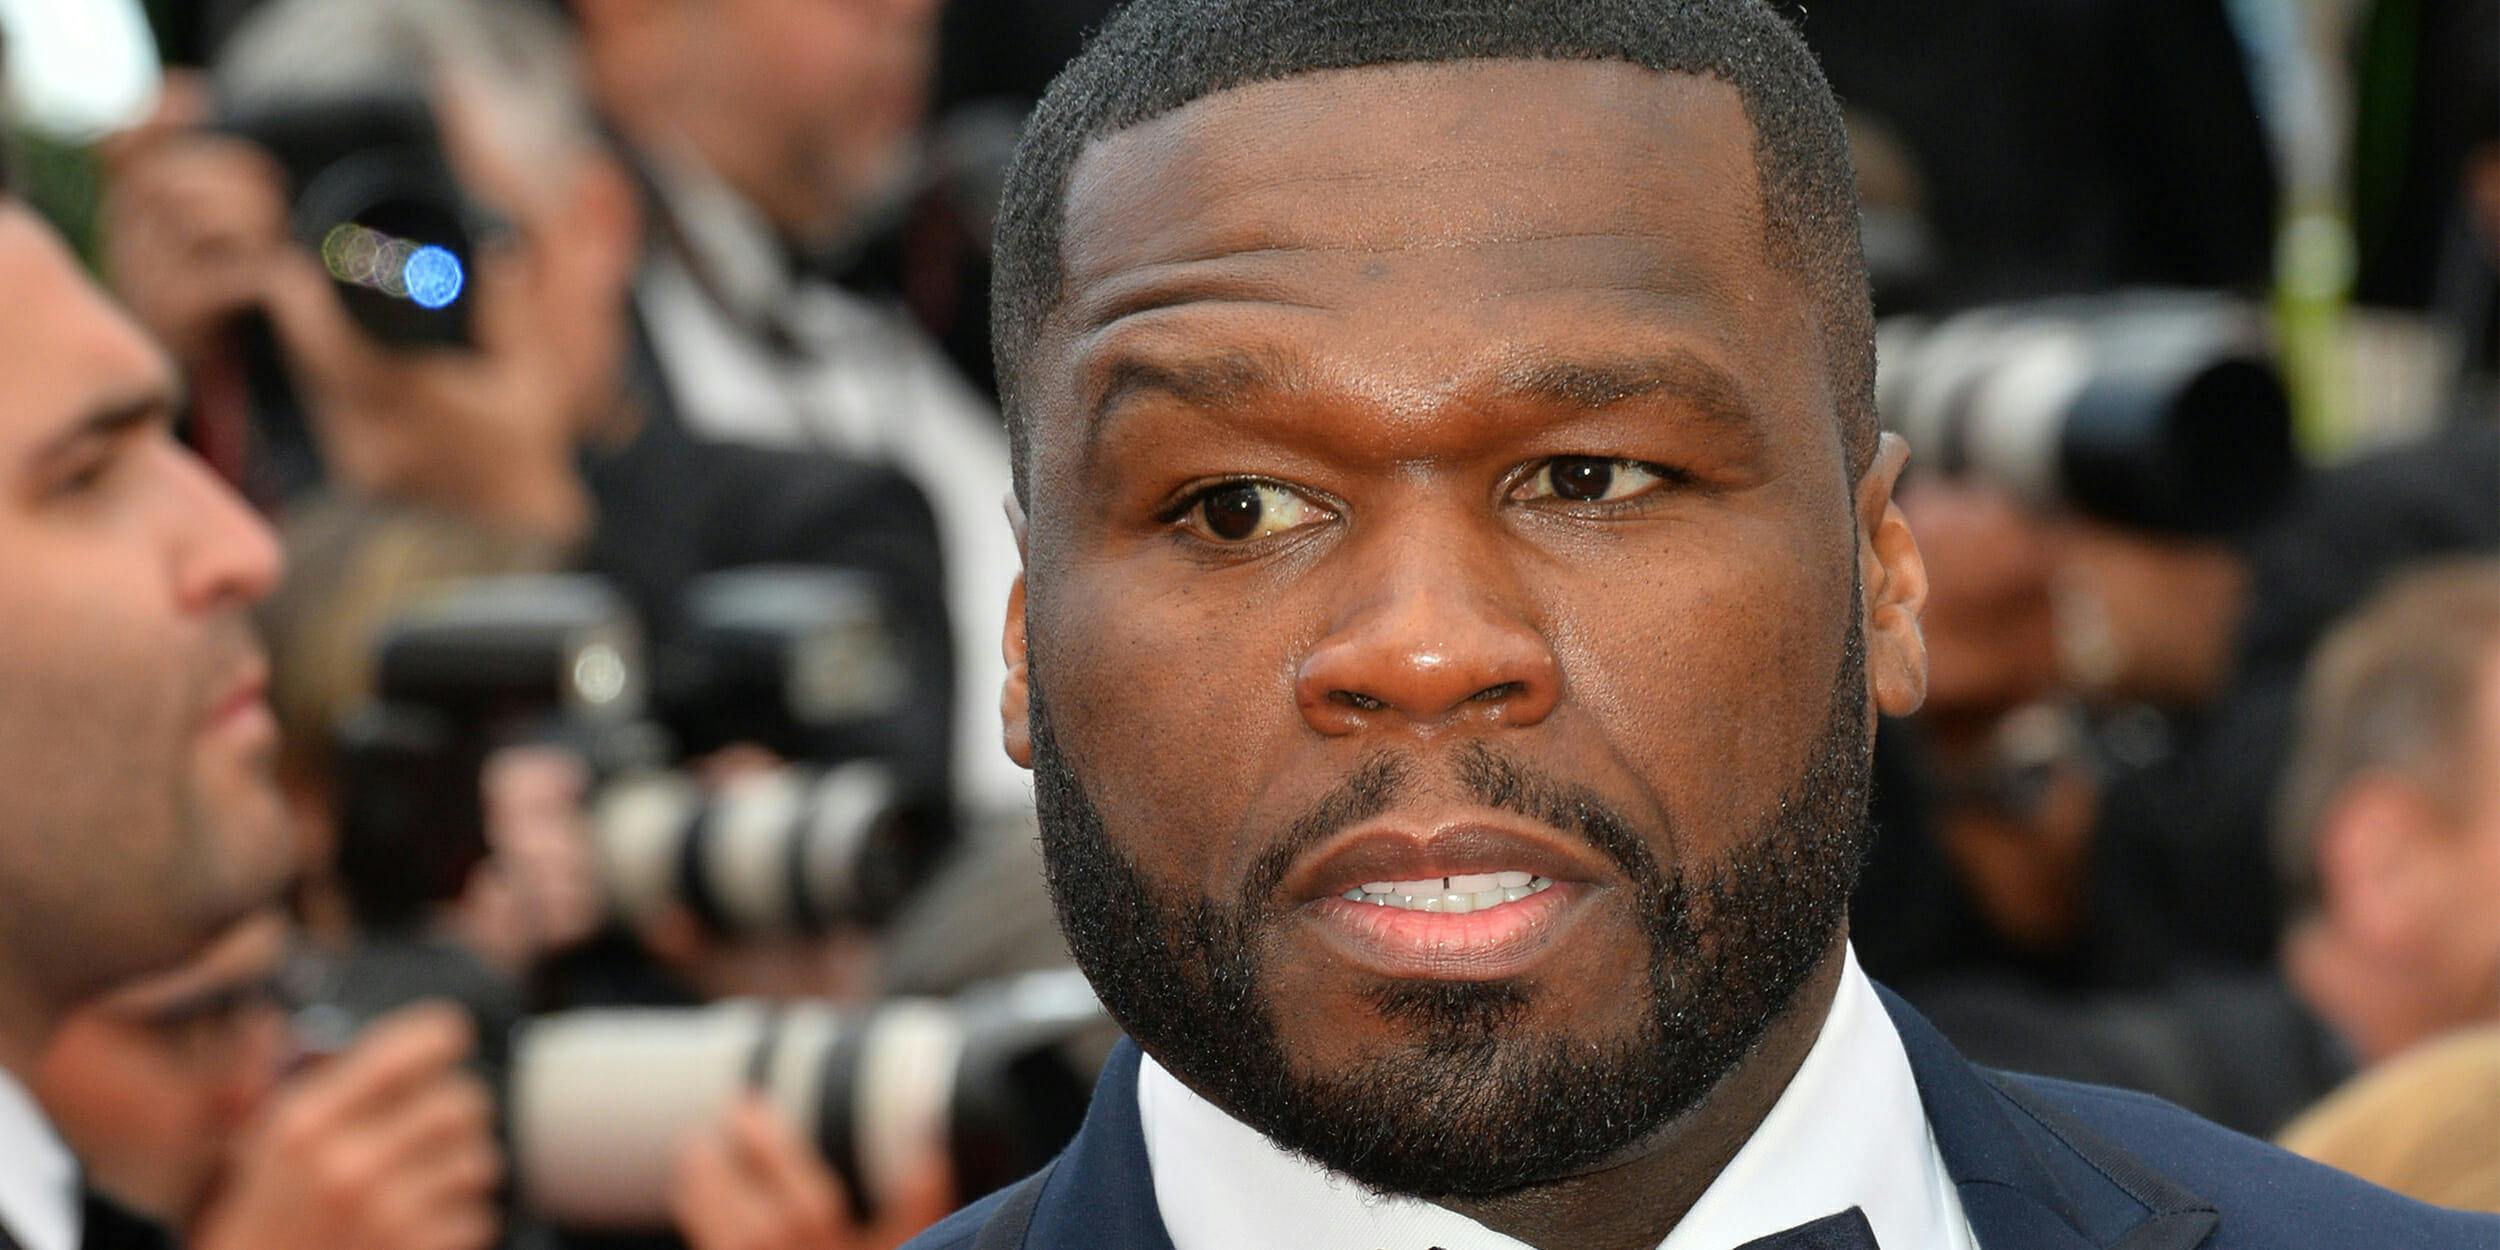 50 Cent sued for revenge porn by ‘Love and Hip-Hop’ star